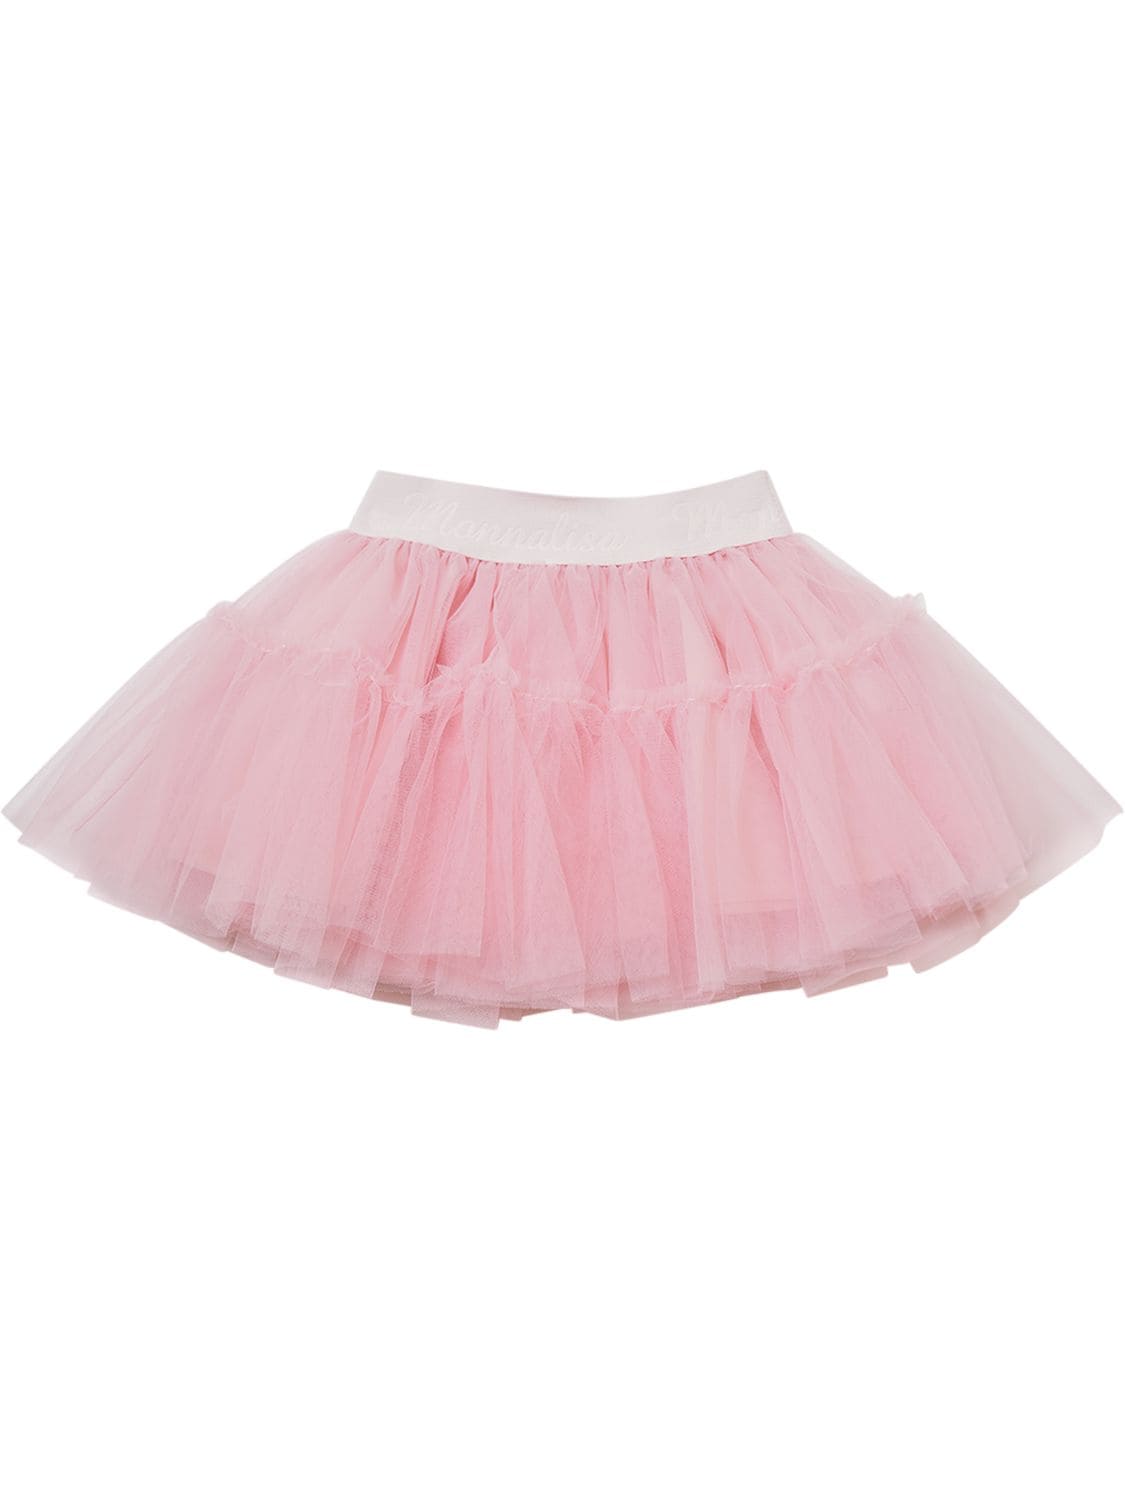 Image of Tulle Skirt